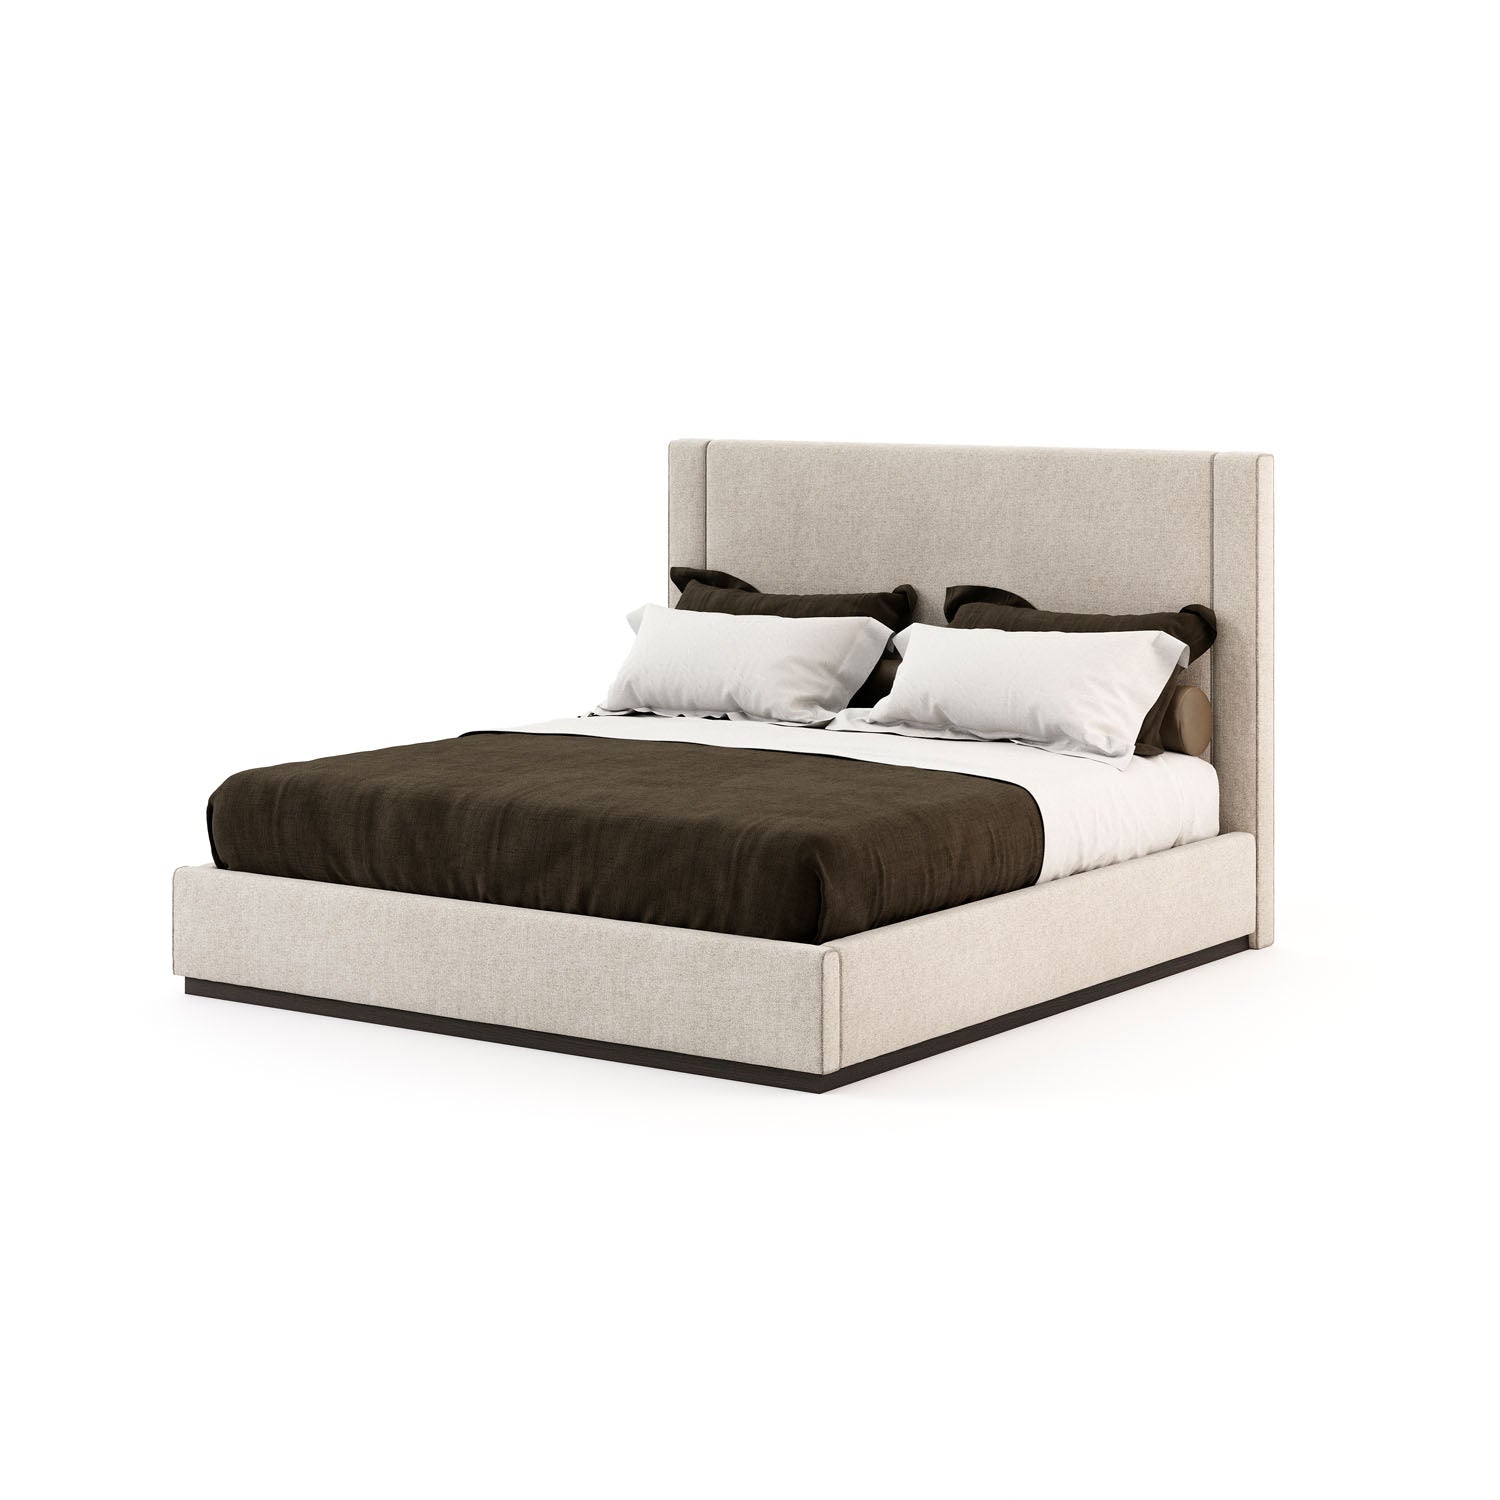 Corin bed